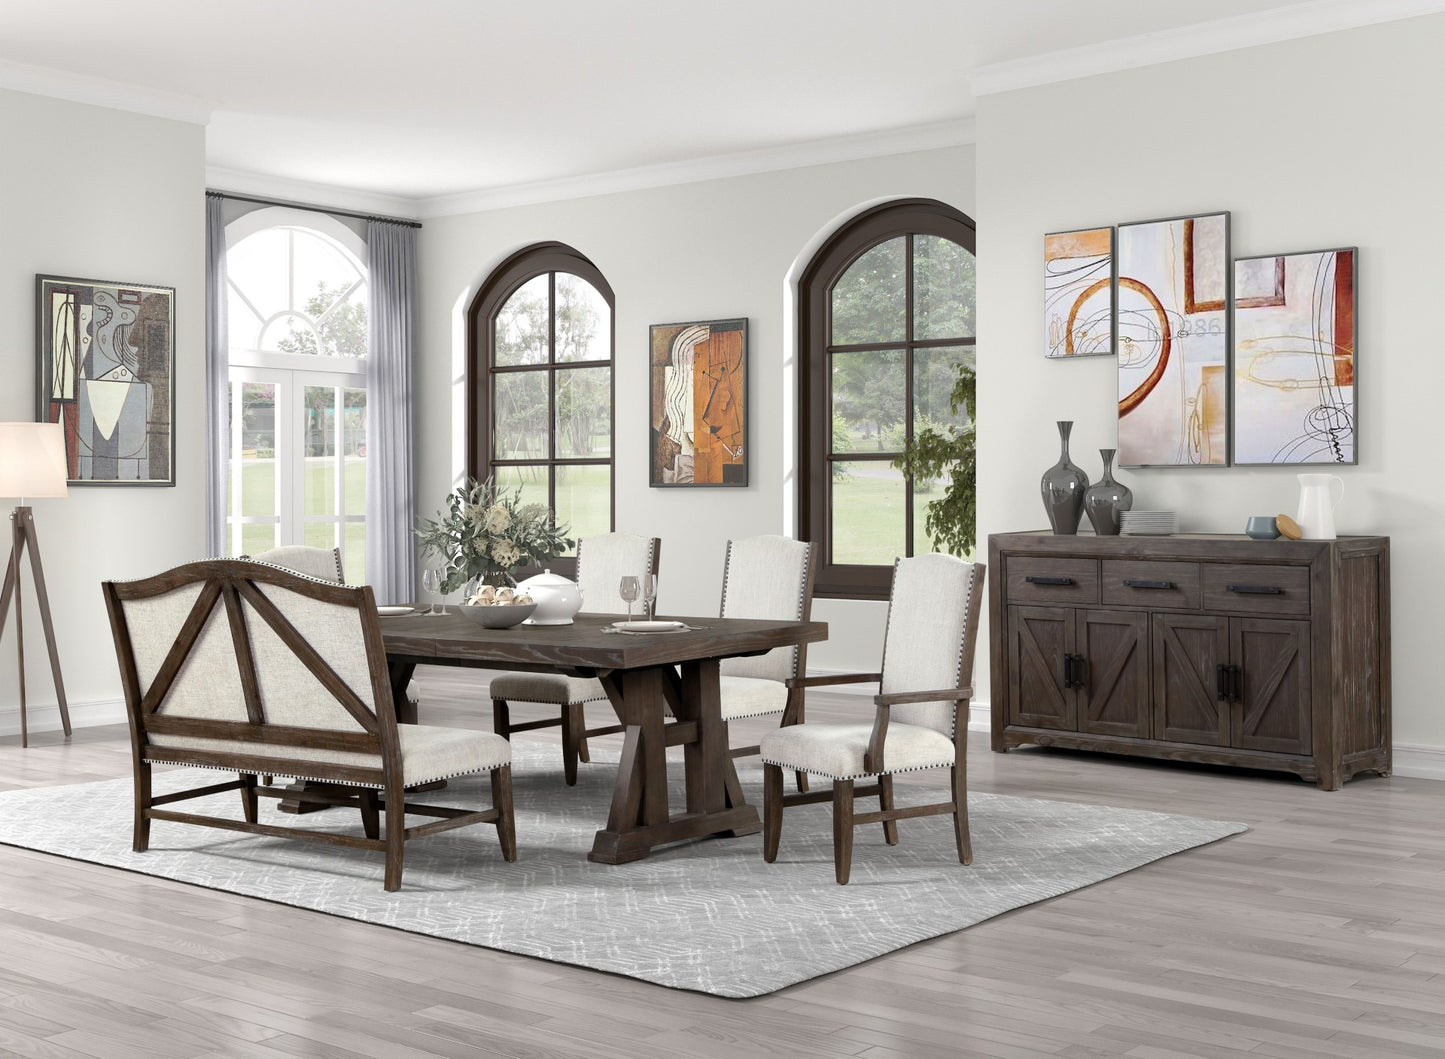 Style Dining Table Chairs & Bench